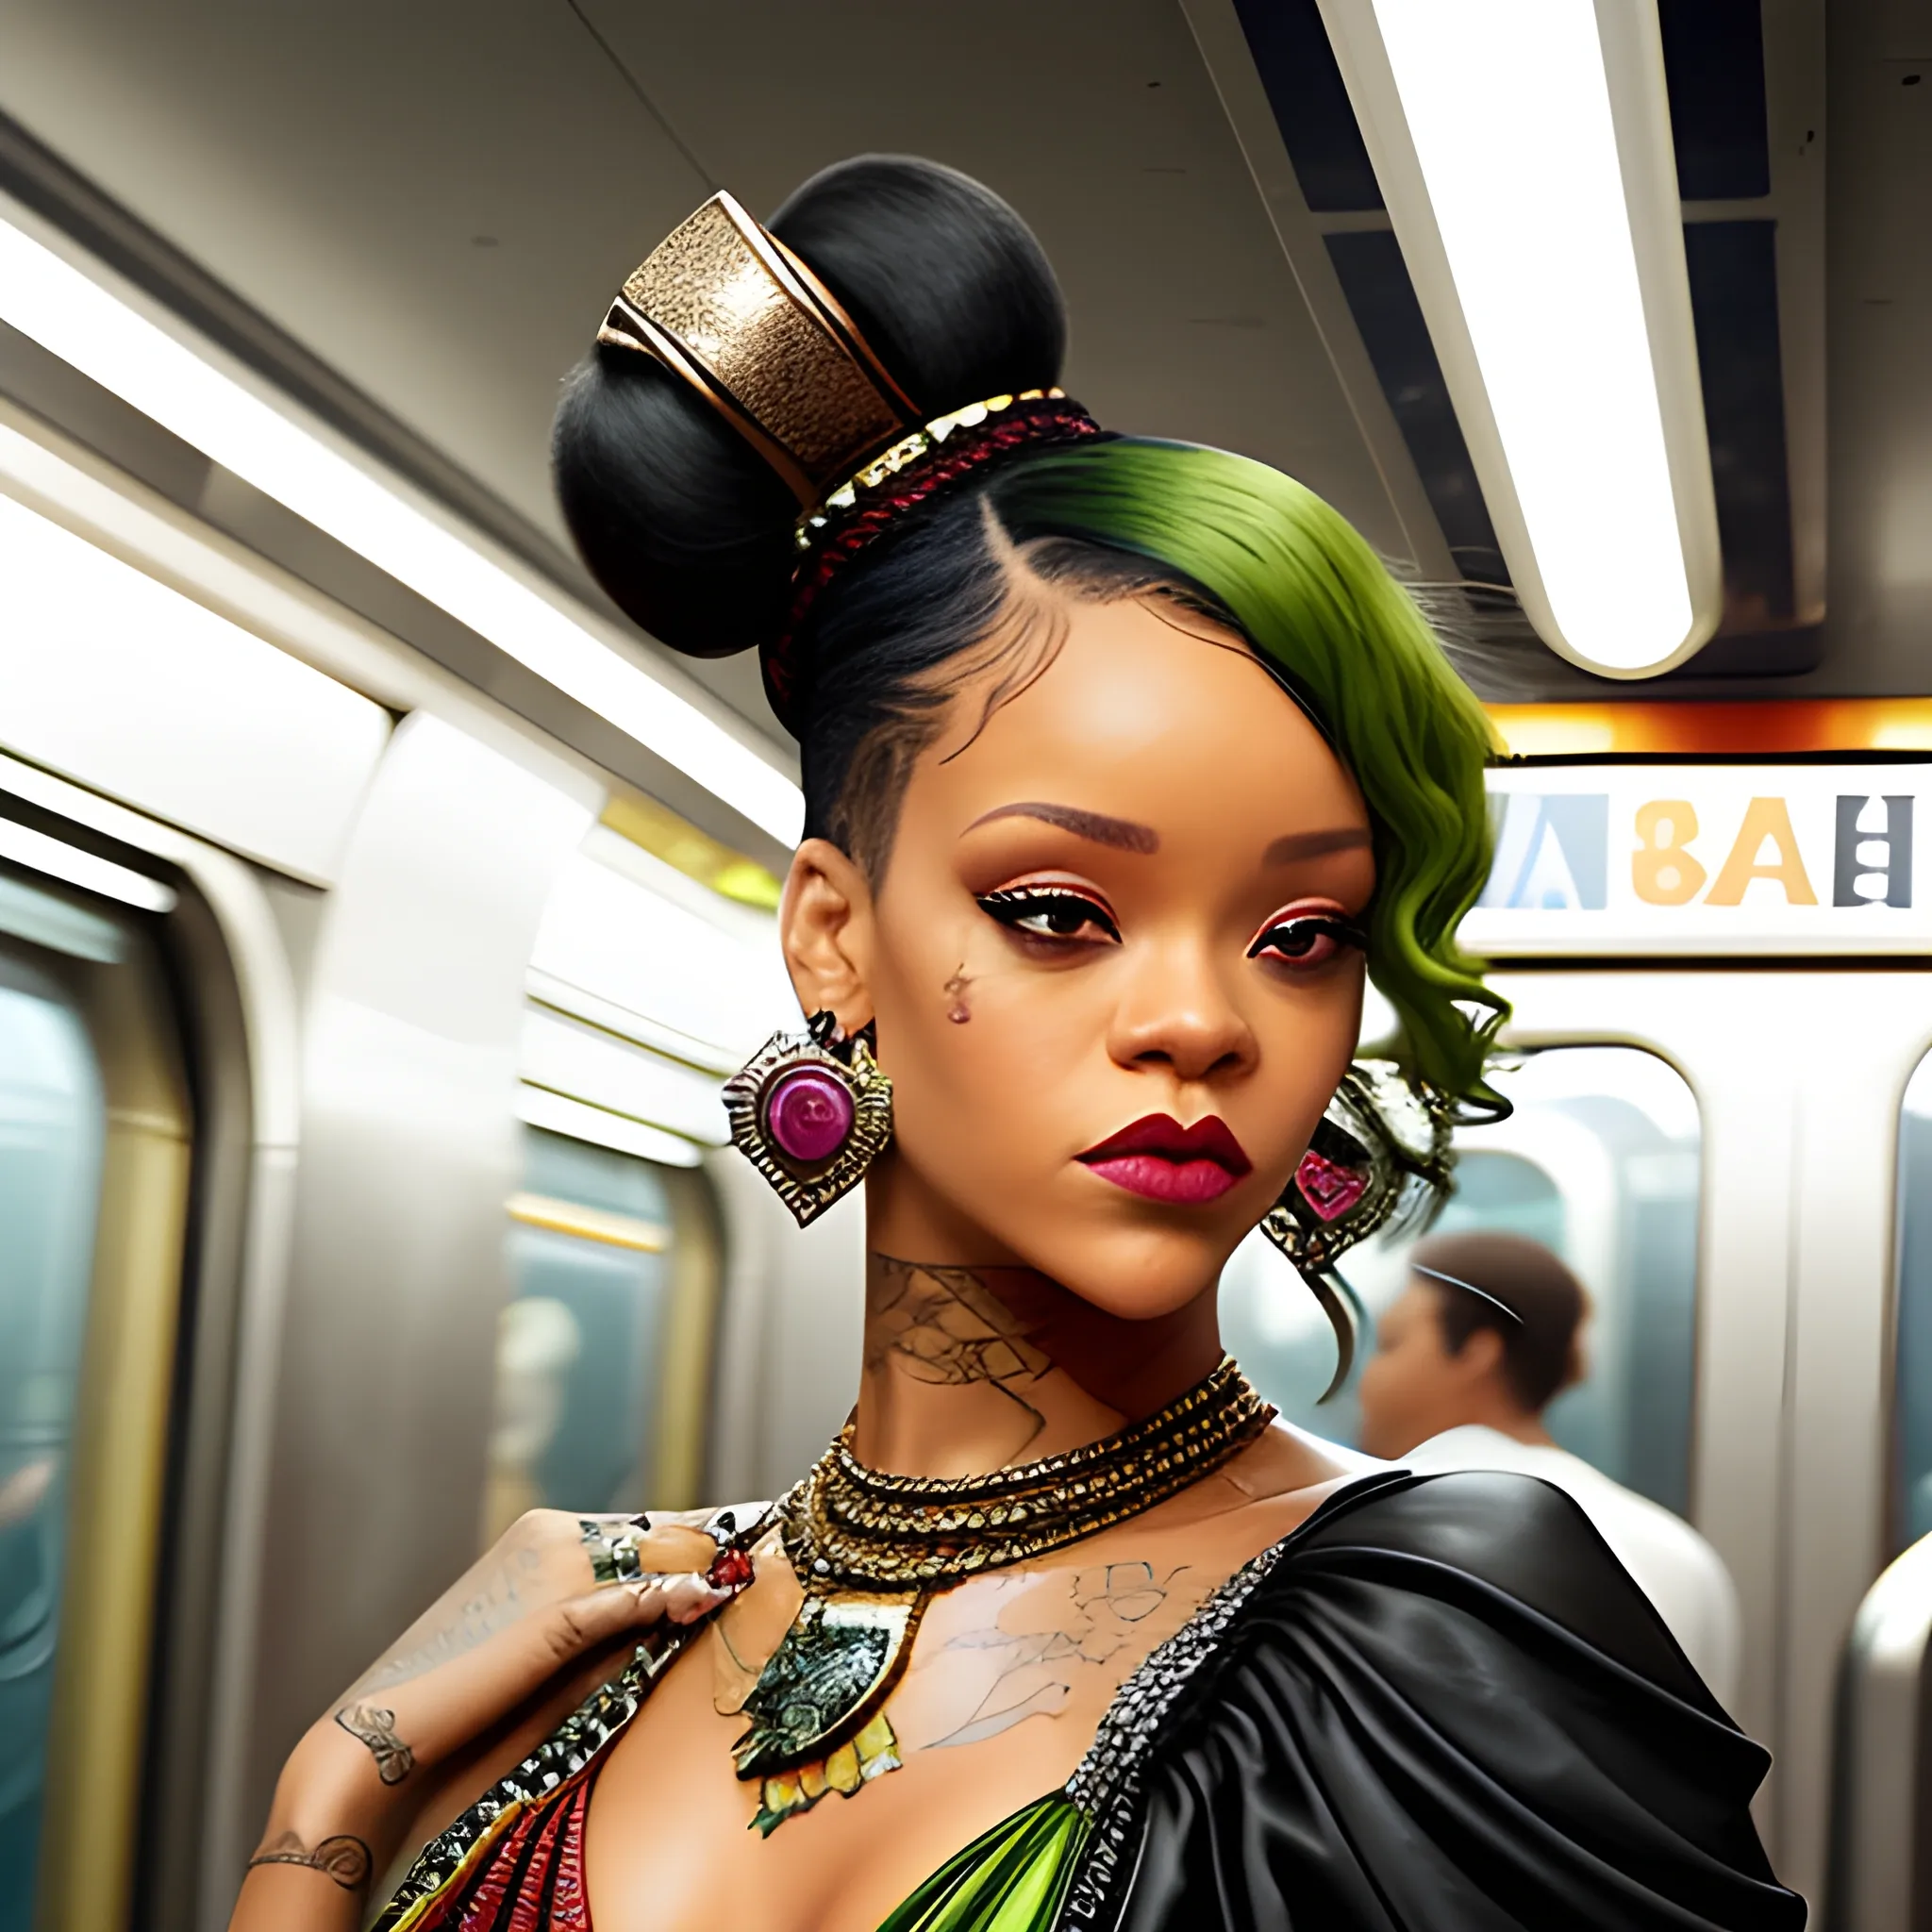 Rihanna on escalator in NYC subway with subway tile on both sides. She is wearing extravagant bohemian inspired outfit . Luxurious make up. She is wearing two black buns in hair. nose piercing. Designer triangular bag. Head tilted to the side. full top lips smaller bottom lip red cupids bow dark hazel and green eyes